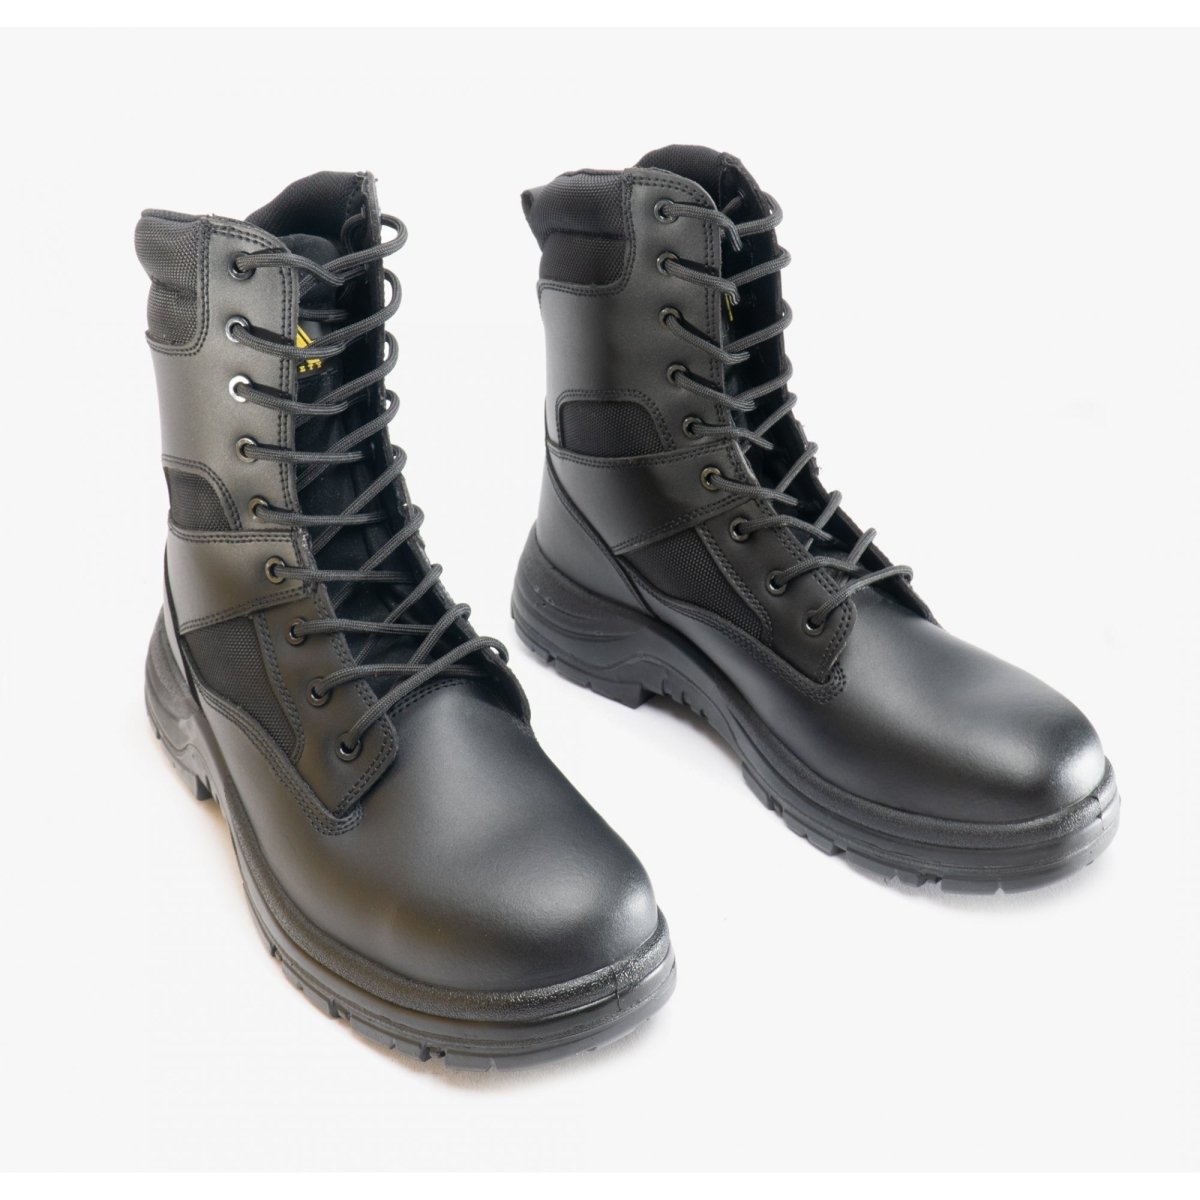 Amblers Safety FS009C Unisex Leather Safety Boots Black 20623 - 32676 - 04 | STB.co.uk